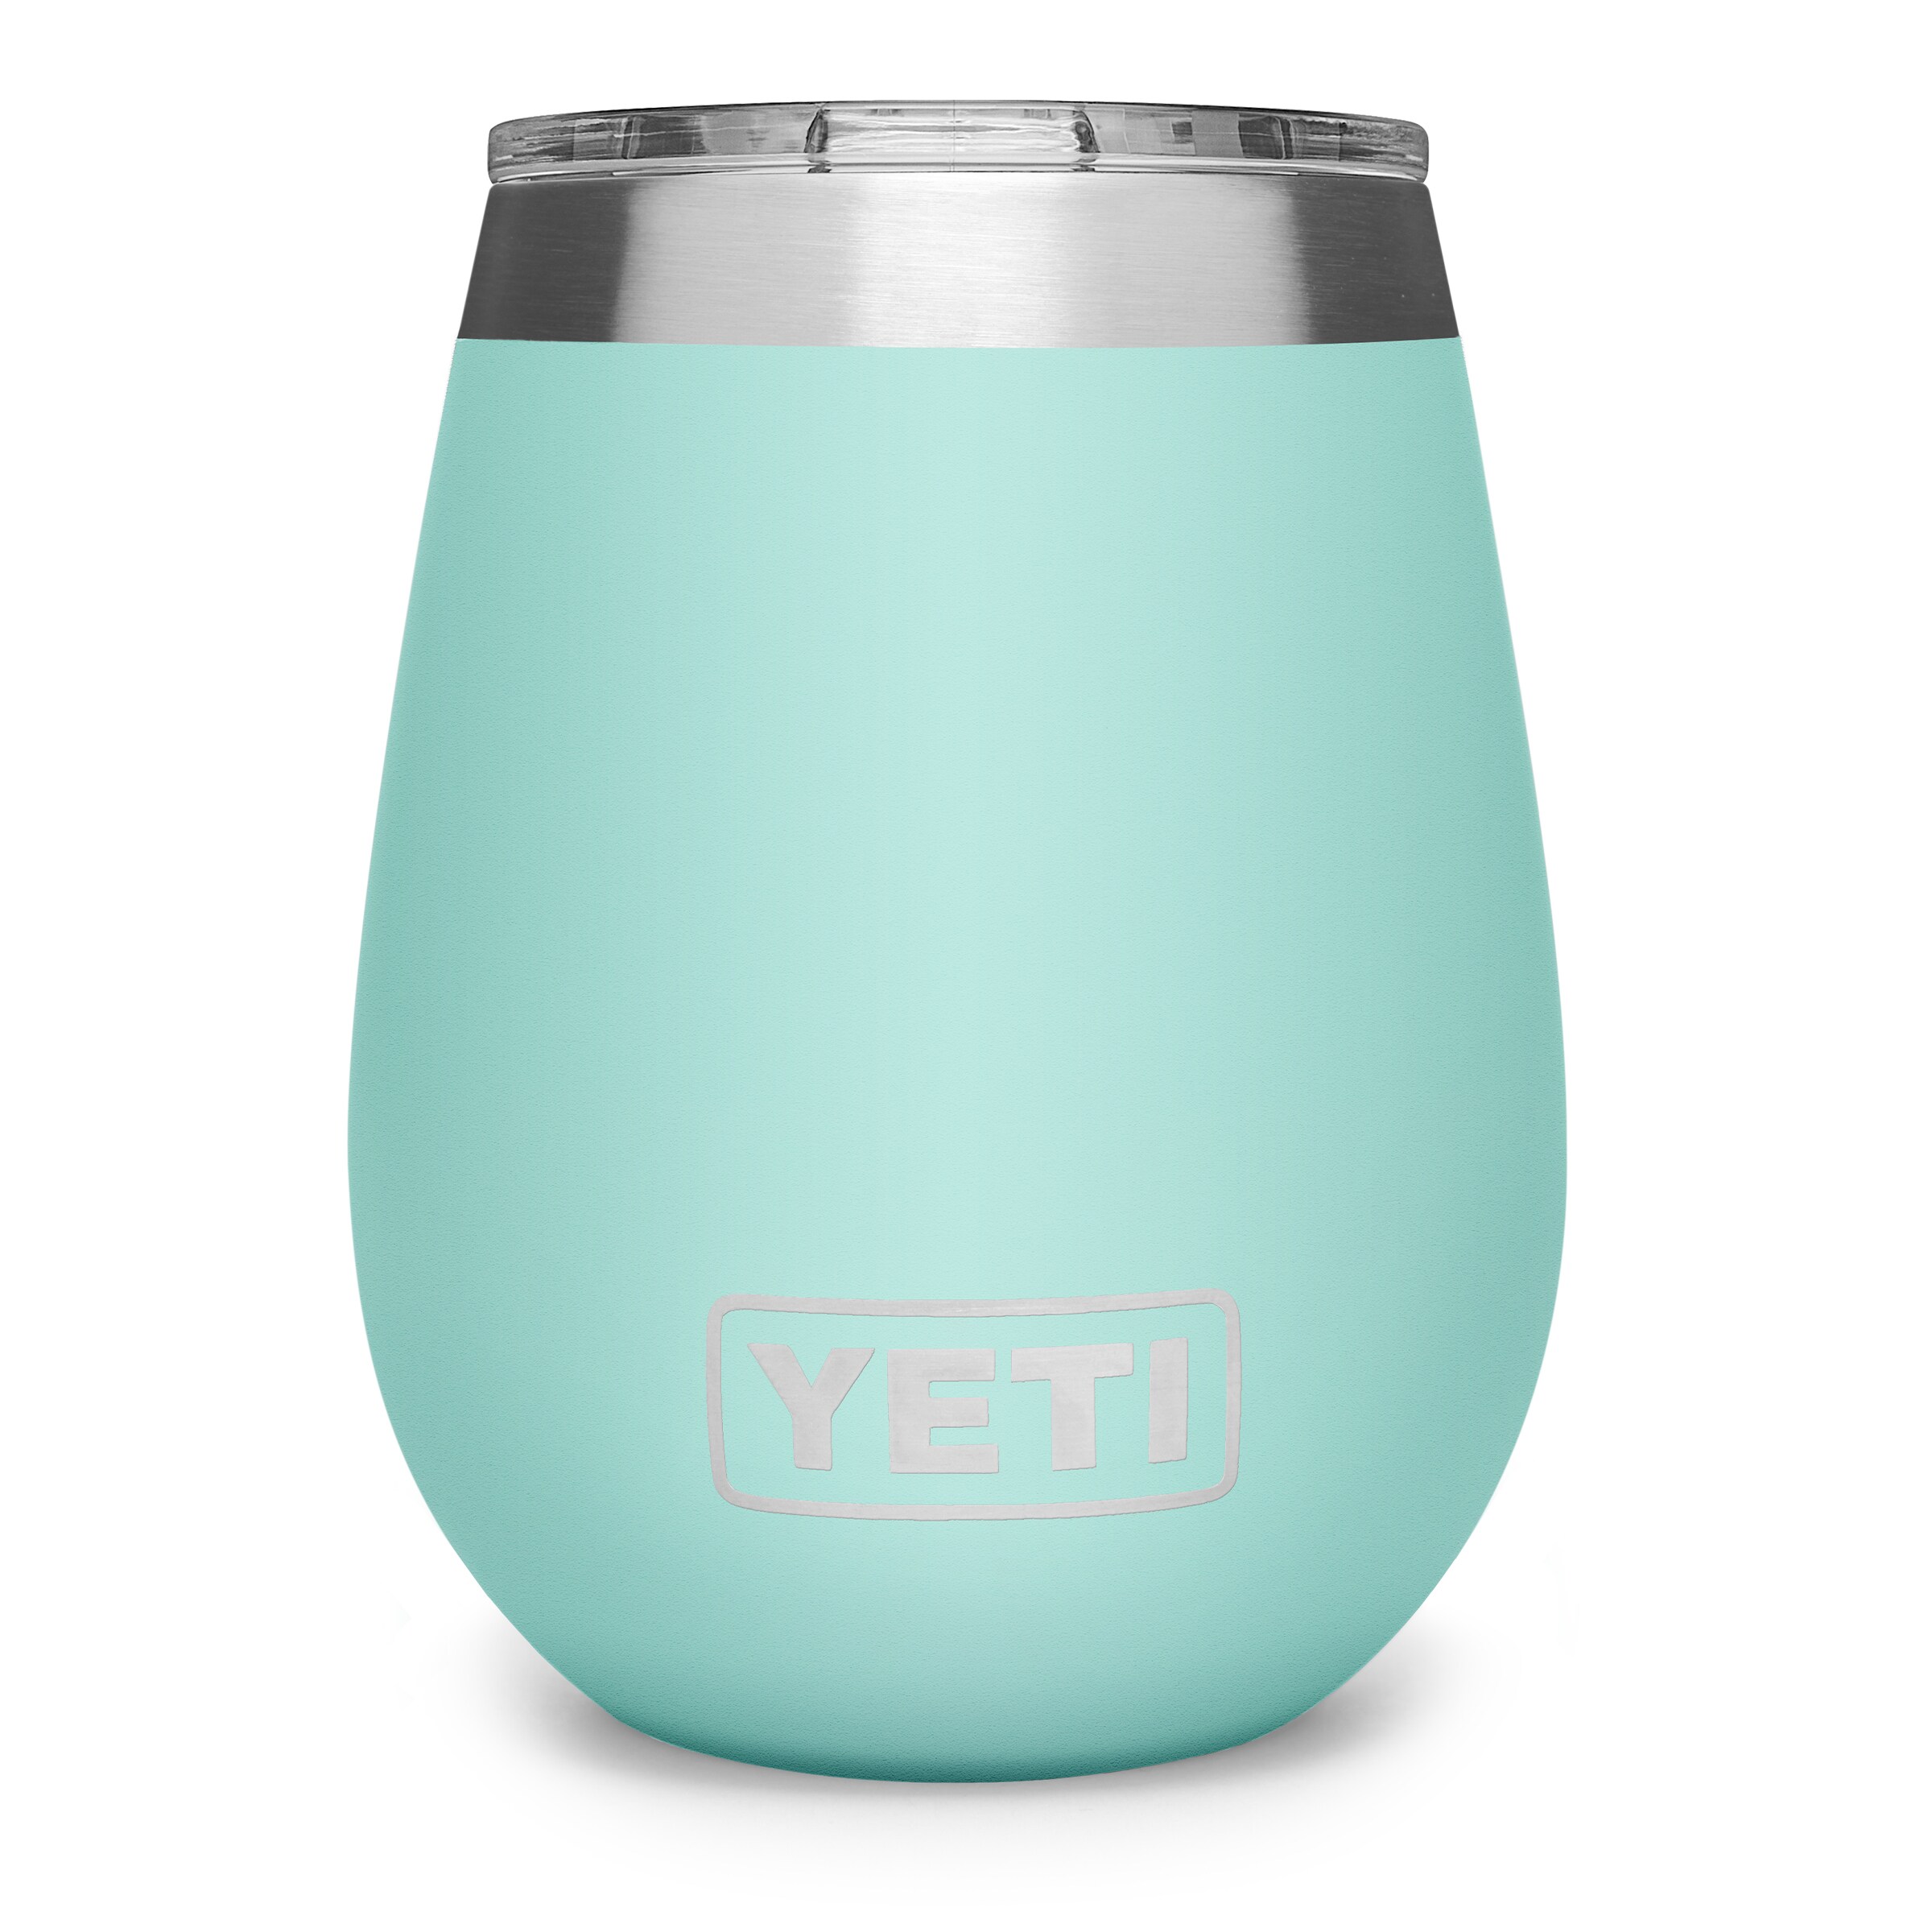 Yeti Just Dropped an All-New Camo Tumbler, and You Don't Want to Miss Out